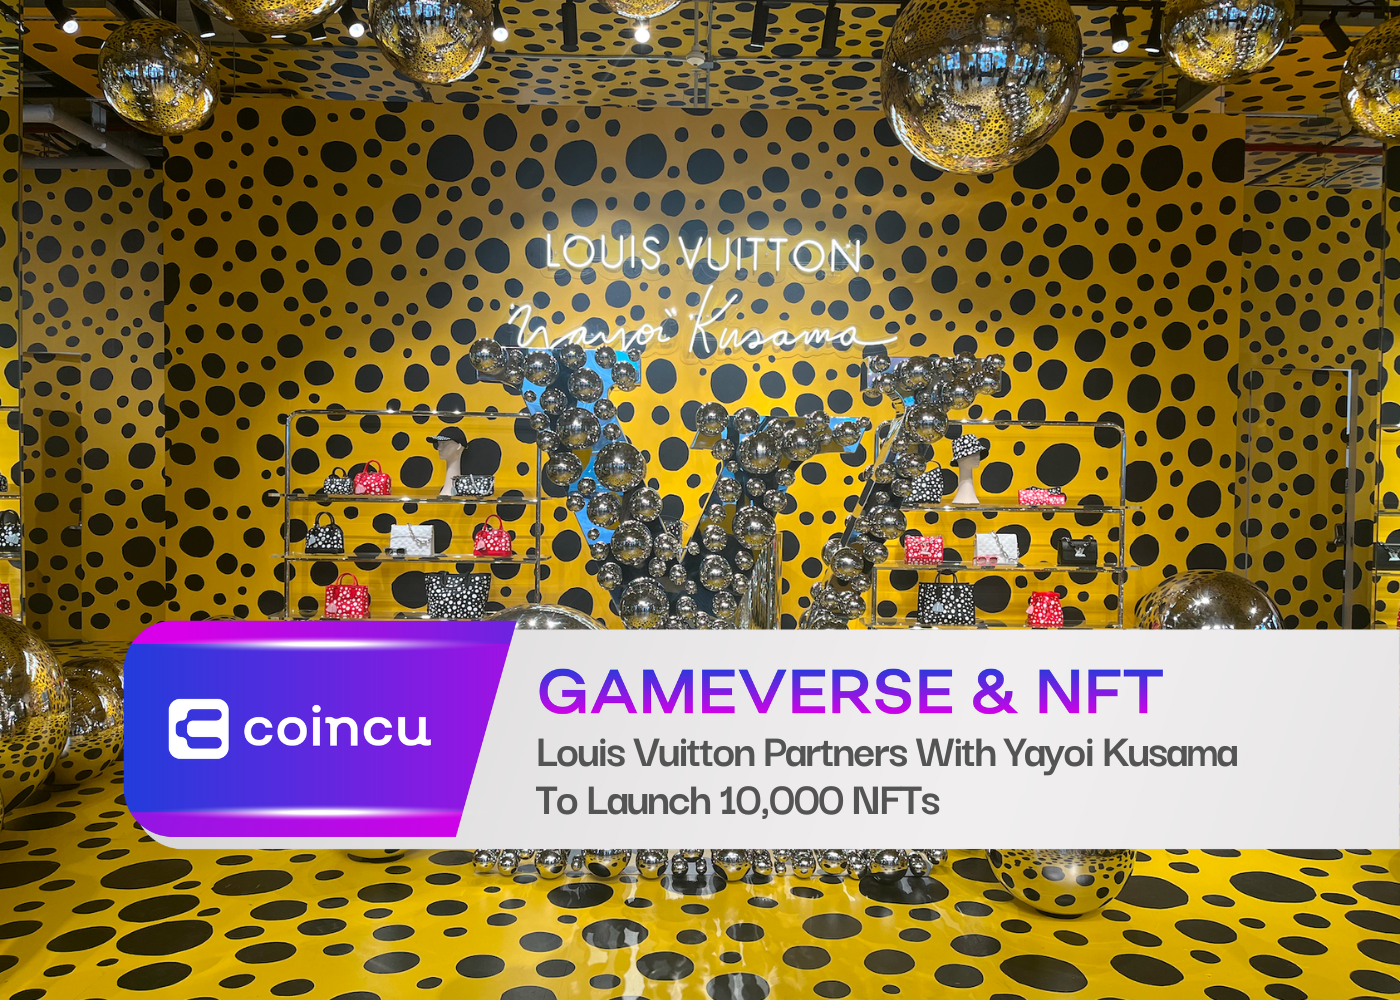 Louis Vuitton will launch more NFT's and two more levels of its